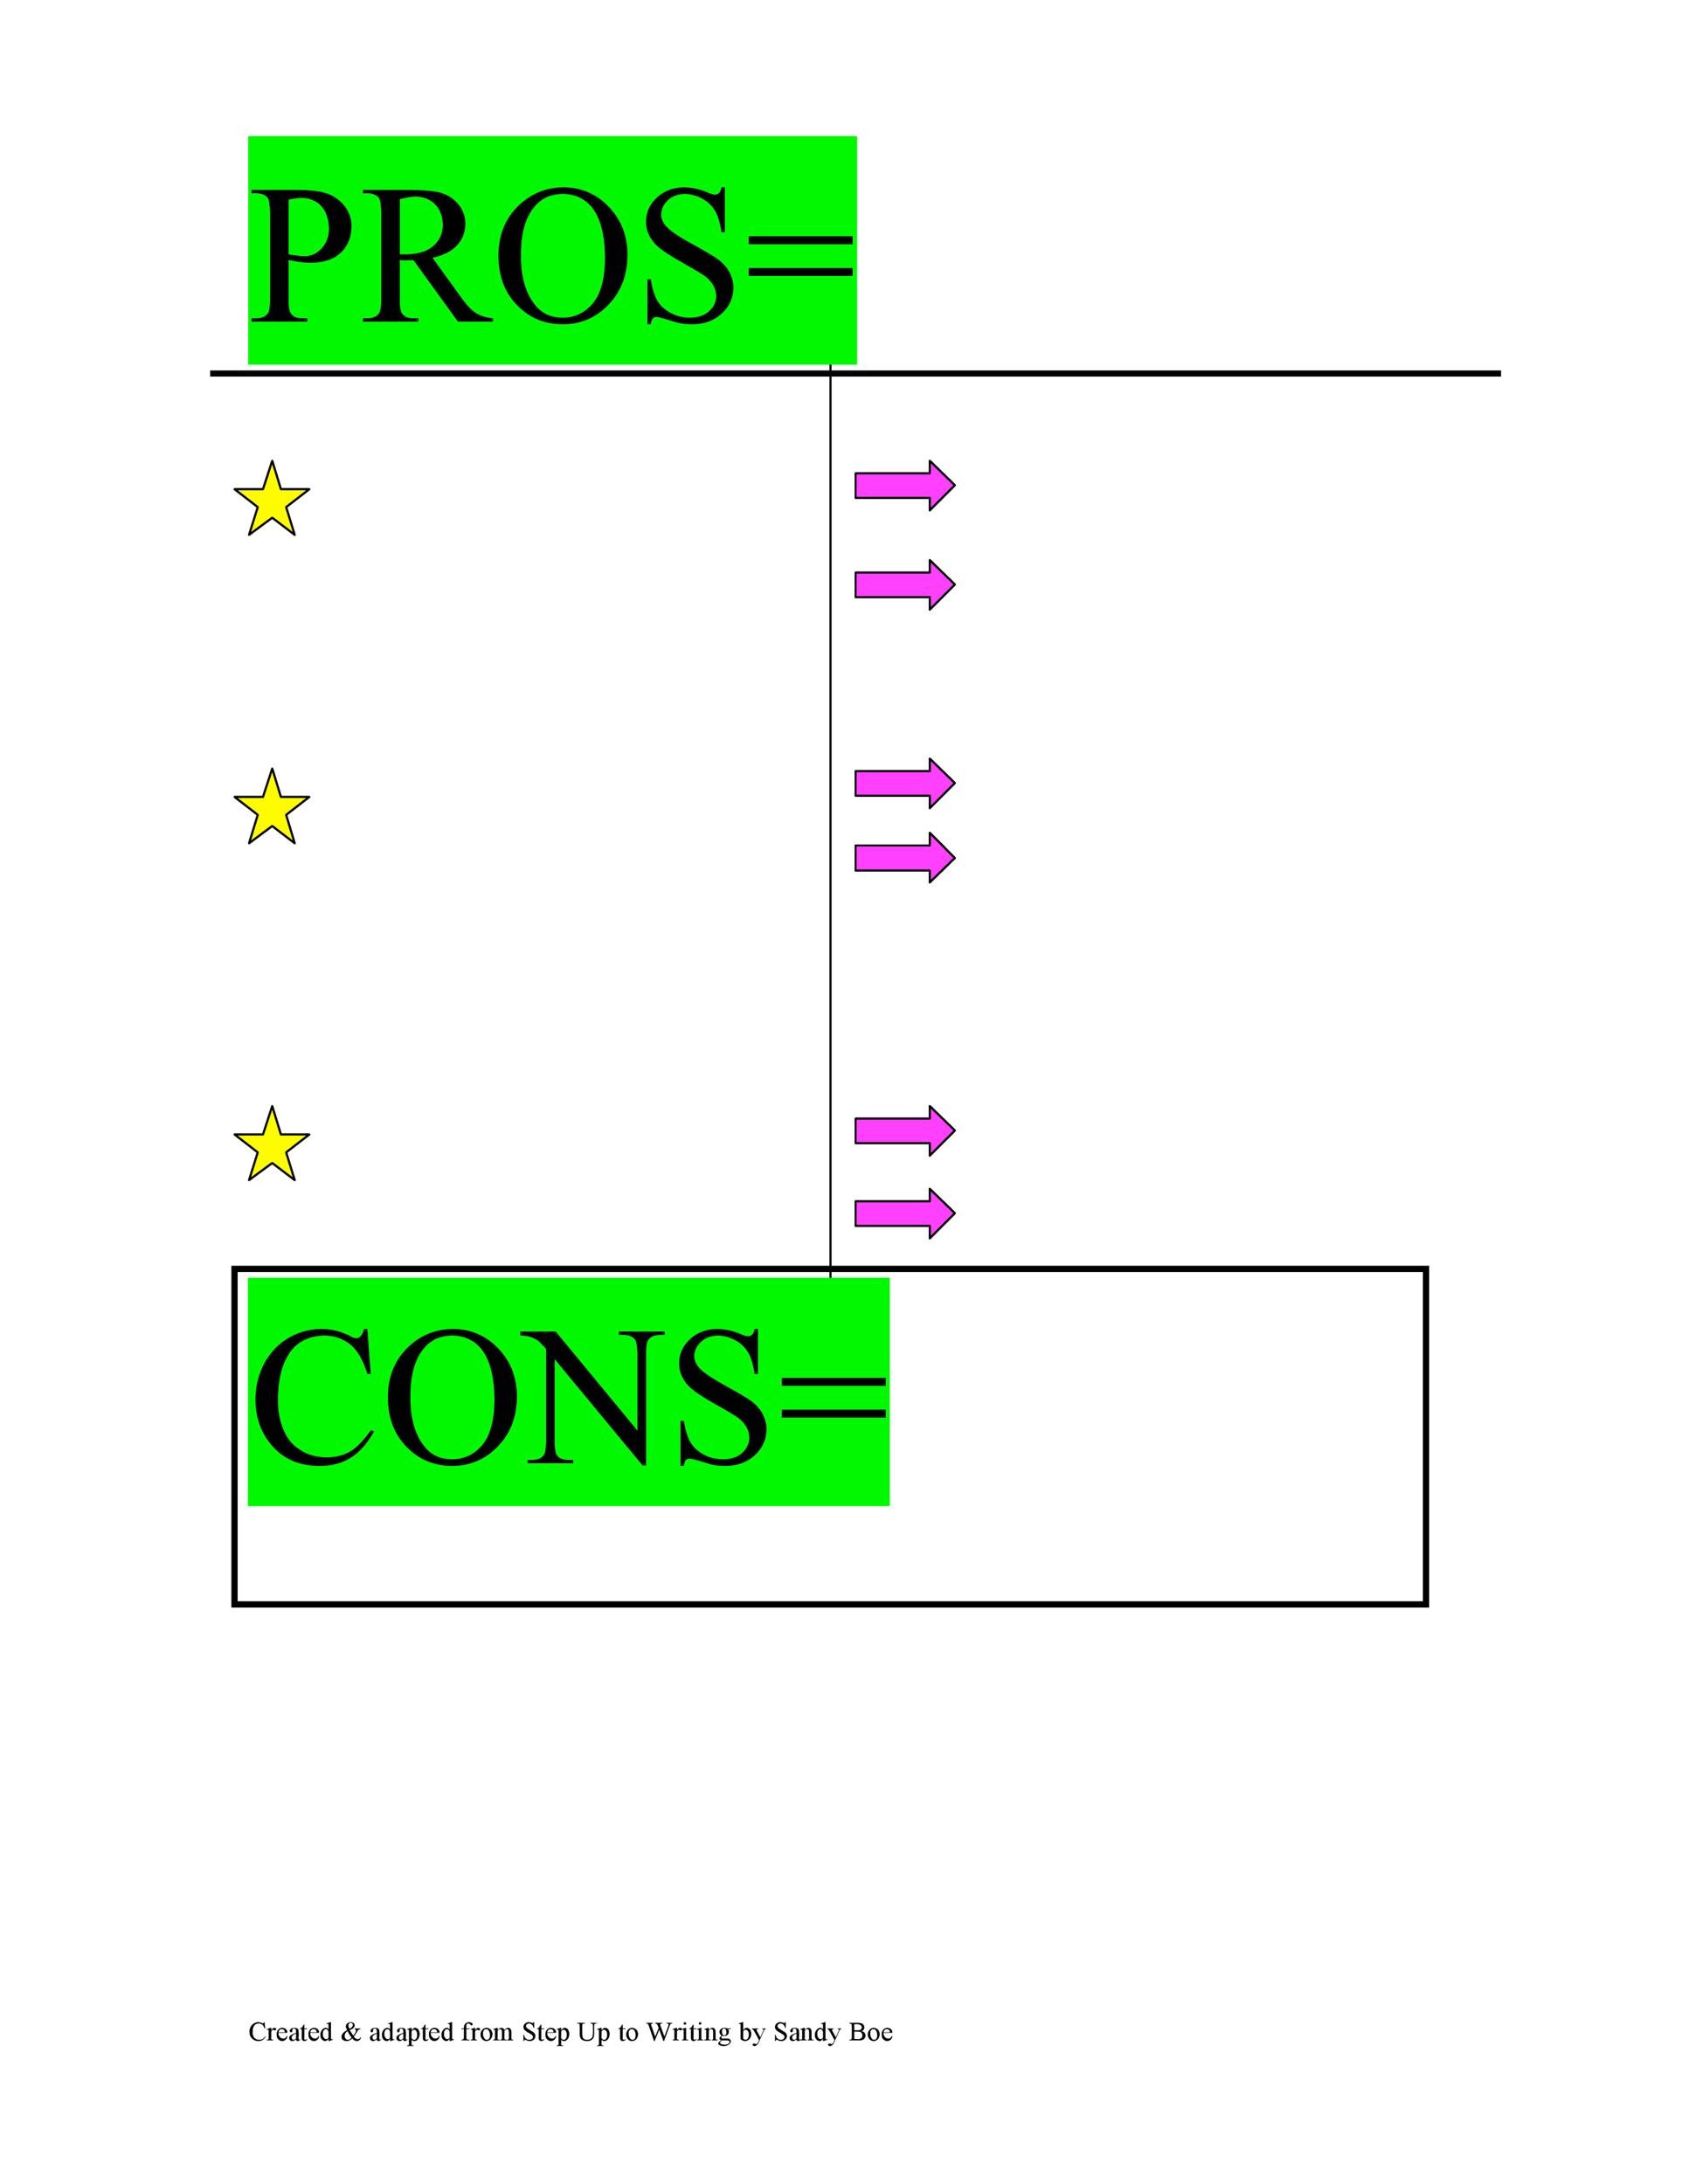 pros and cons template free download